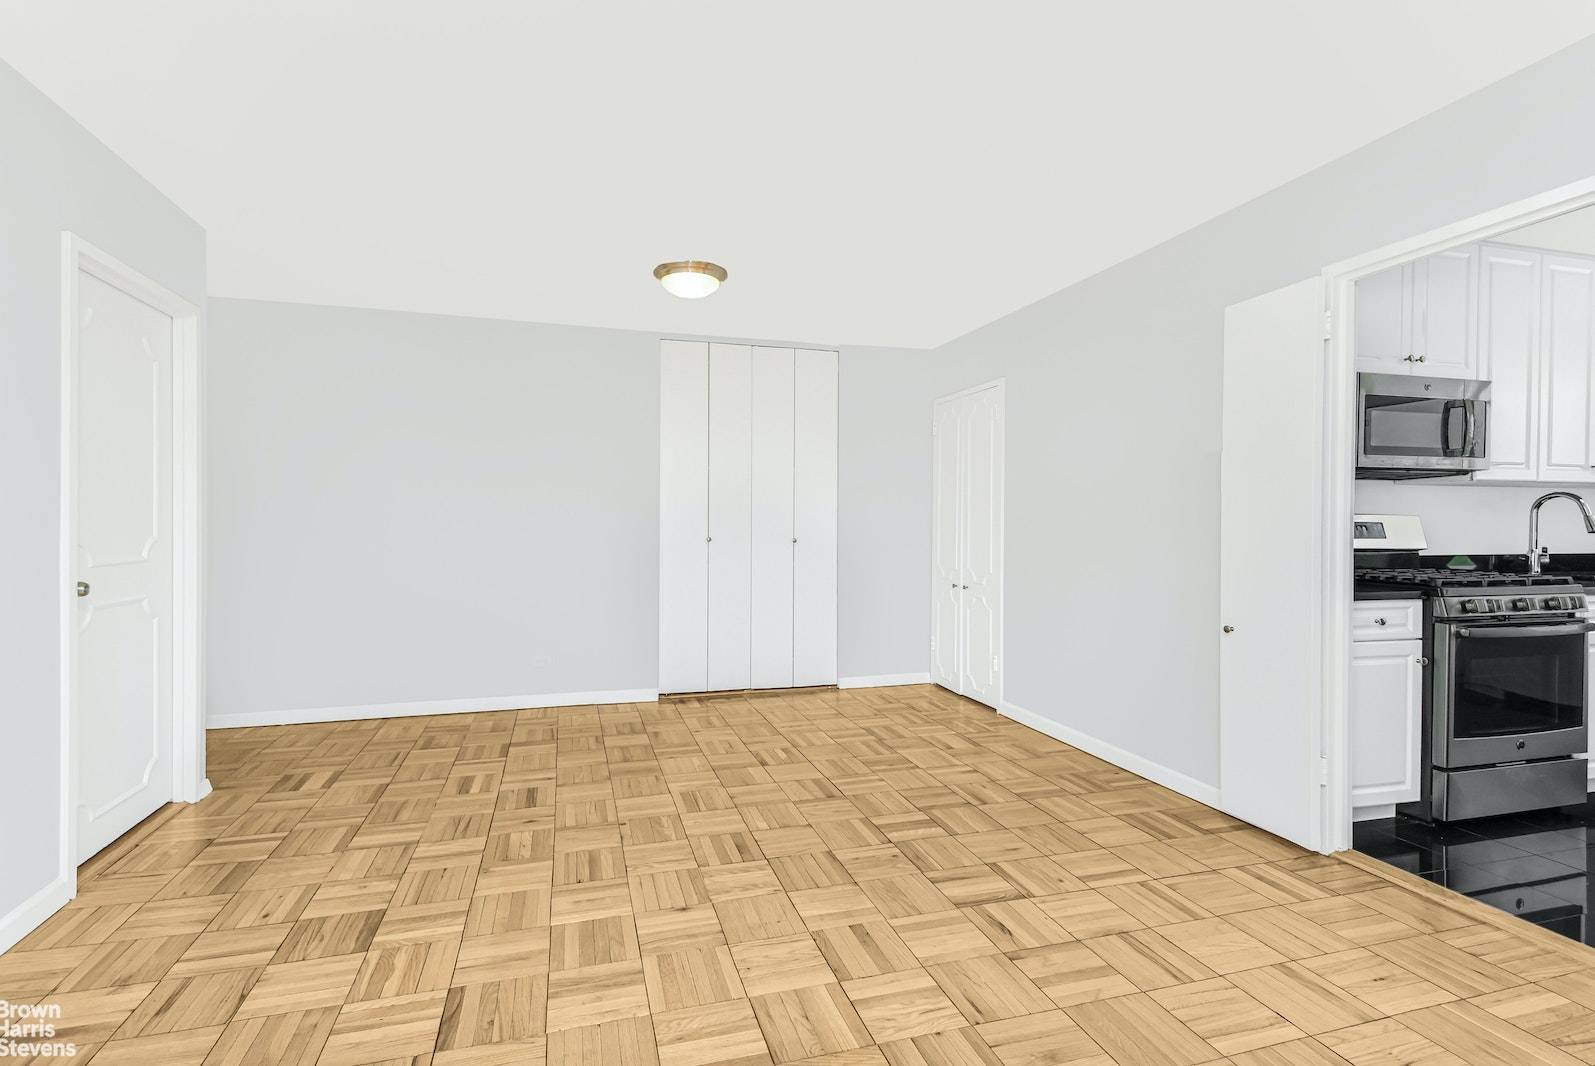 No Board Approval for this newly renovated two bedroom, two bath apartment with a terrace at the sought after Whitehall.